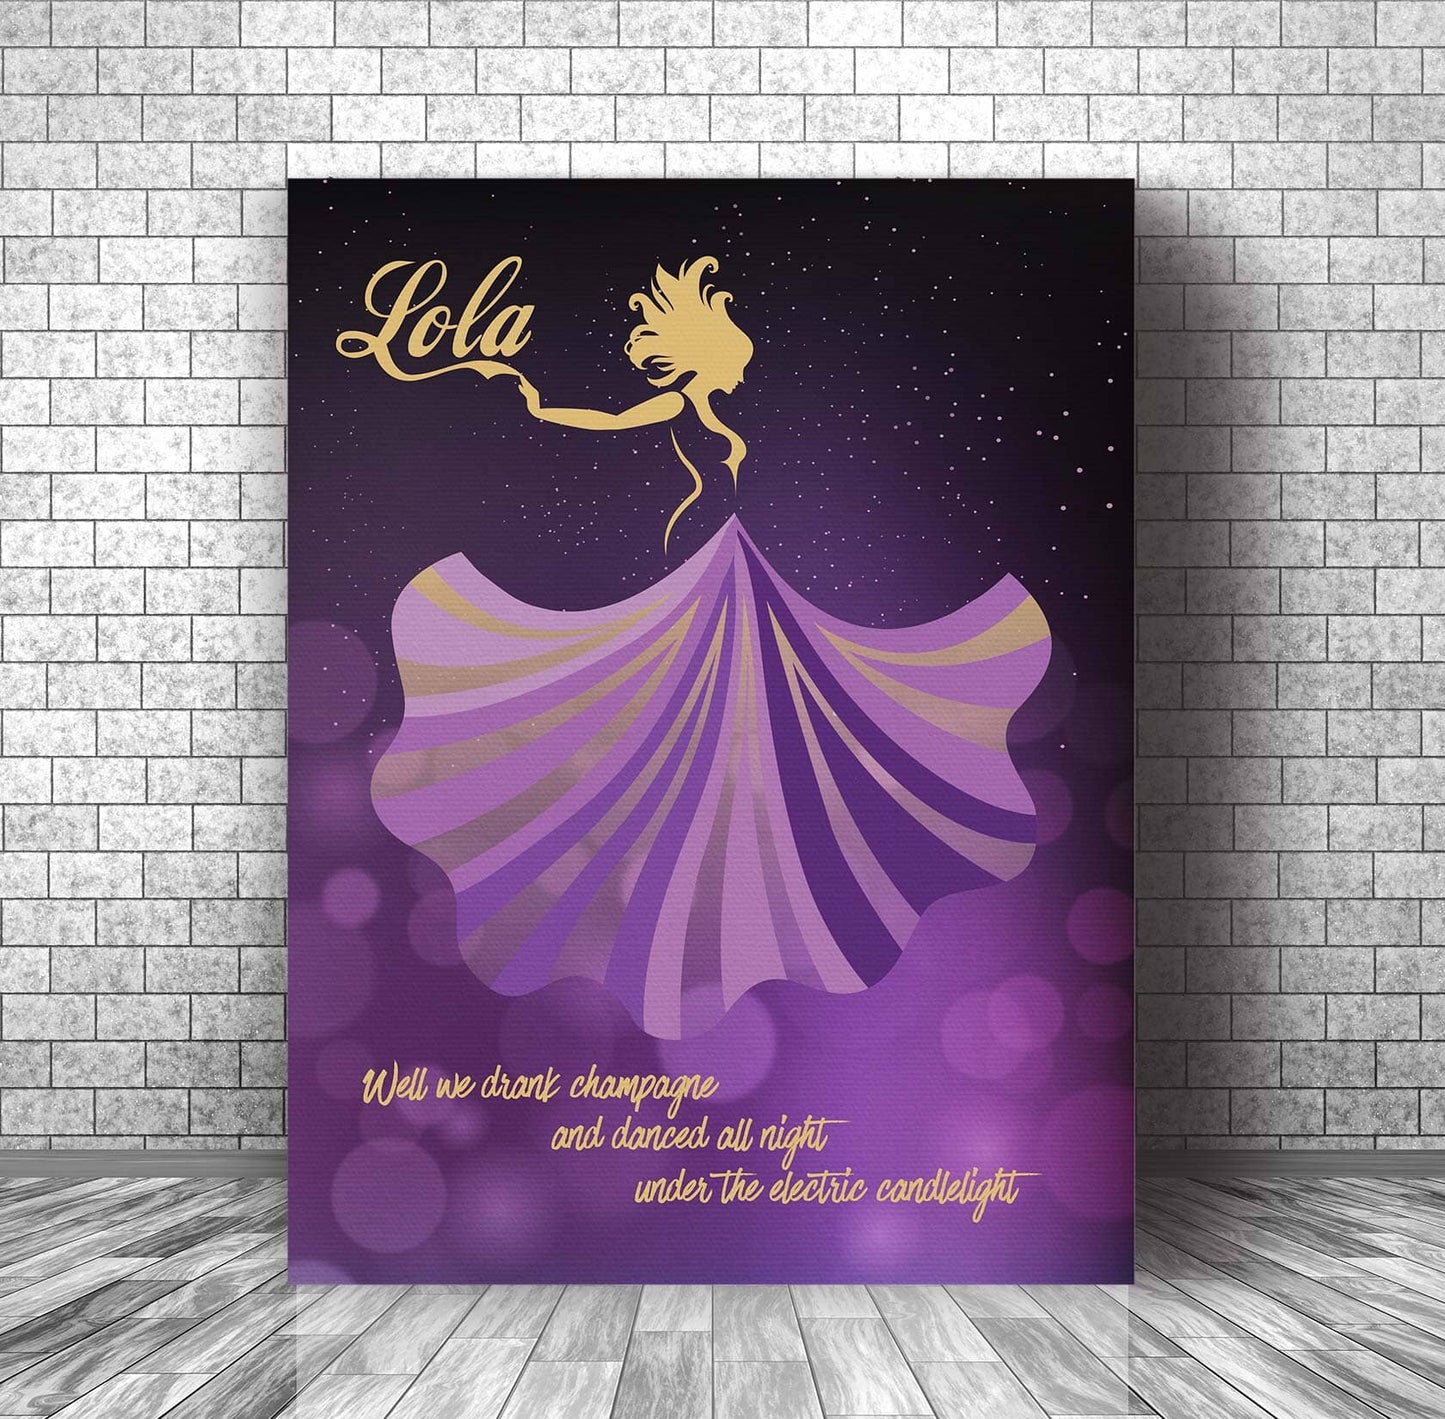 Lola by the Kinks - Classic Rock n' Roll 70s Song Lyric Art Song Lyrics Art Song Lyrics Art 11x14 Canvas Wrap 